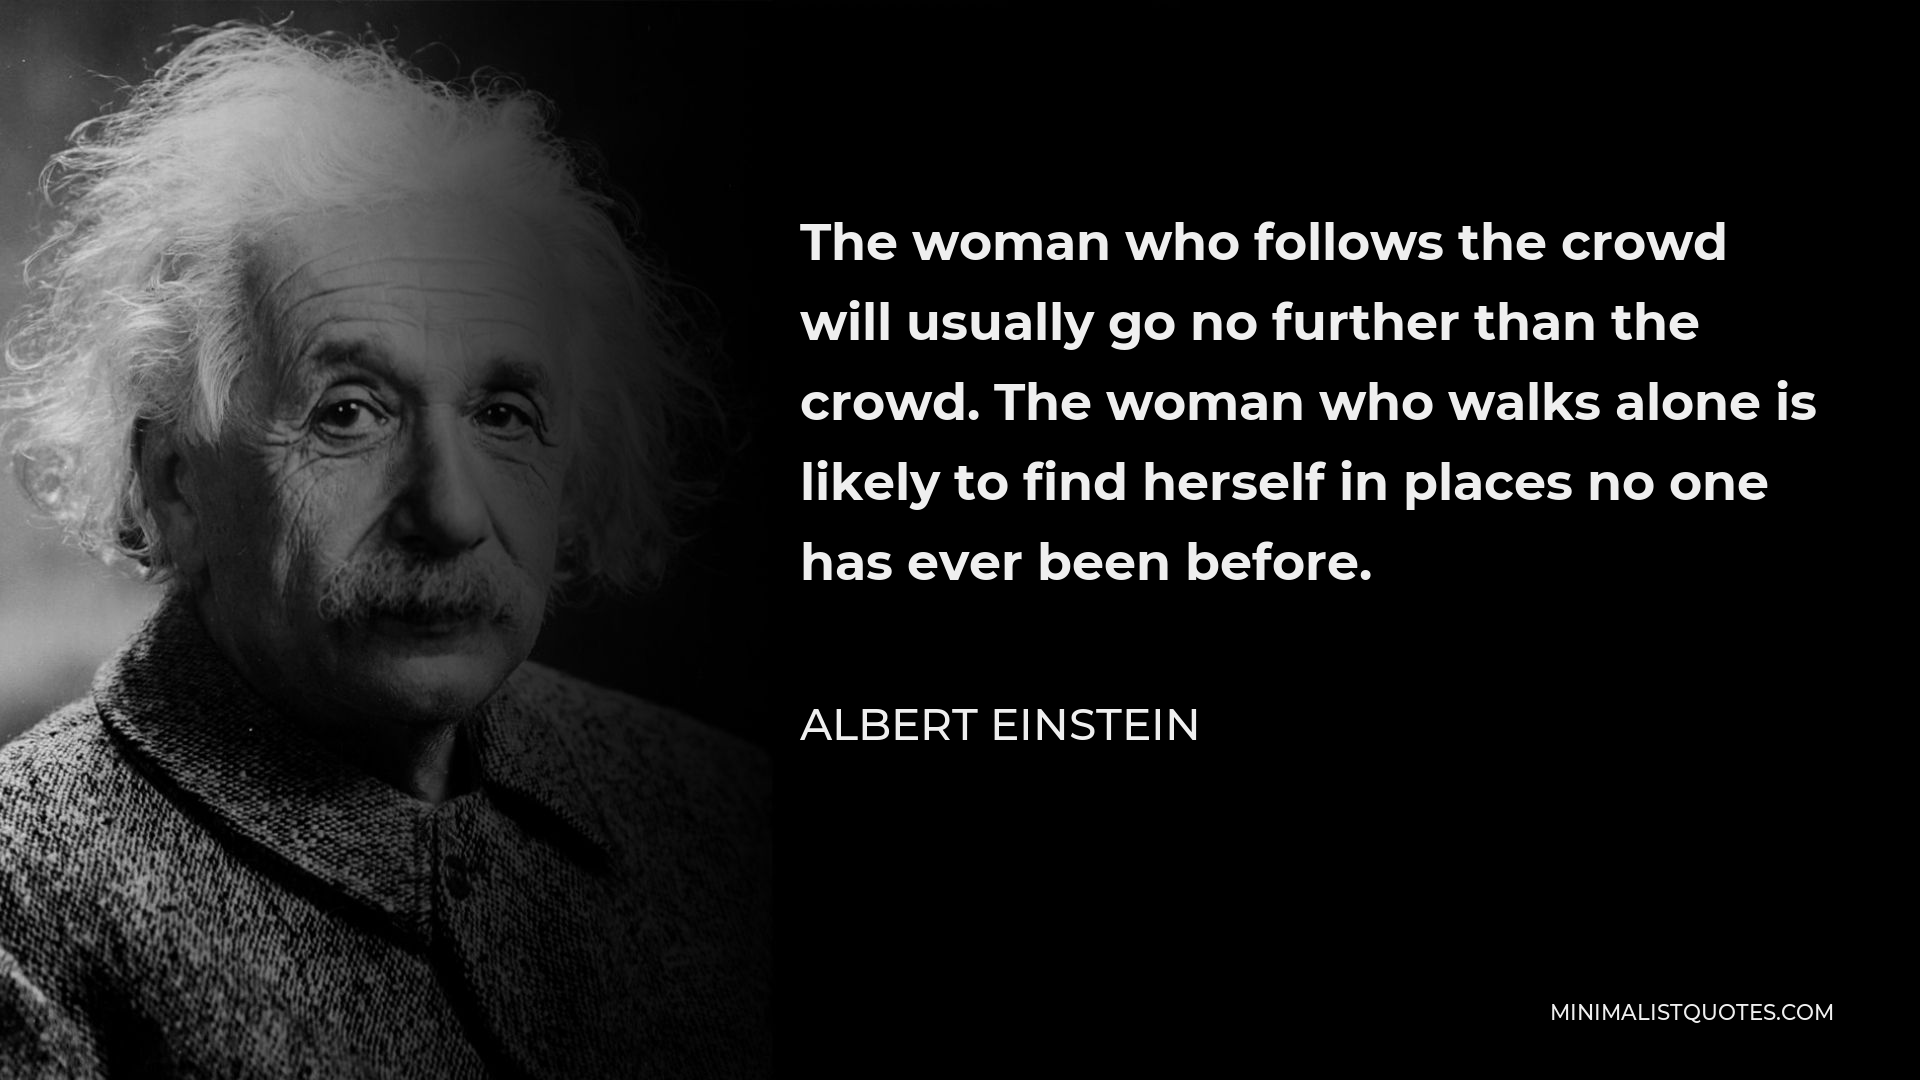 Albert Einstein Quote - The woman who follows the crowd will usually go no further than the crowd. The woman who walks alone is likely to find herself in places no one has ever been before.